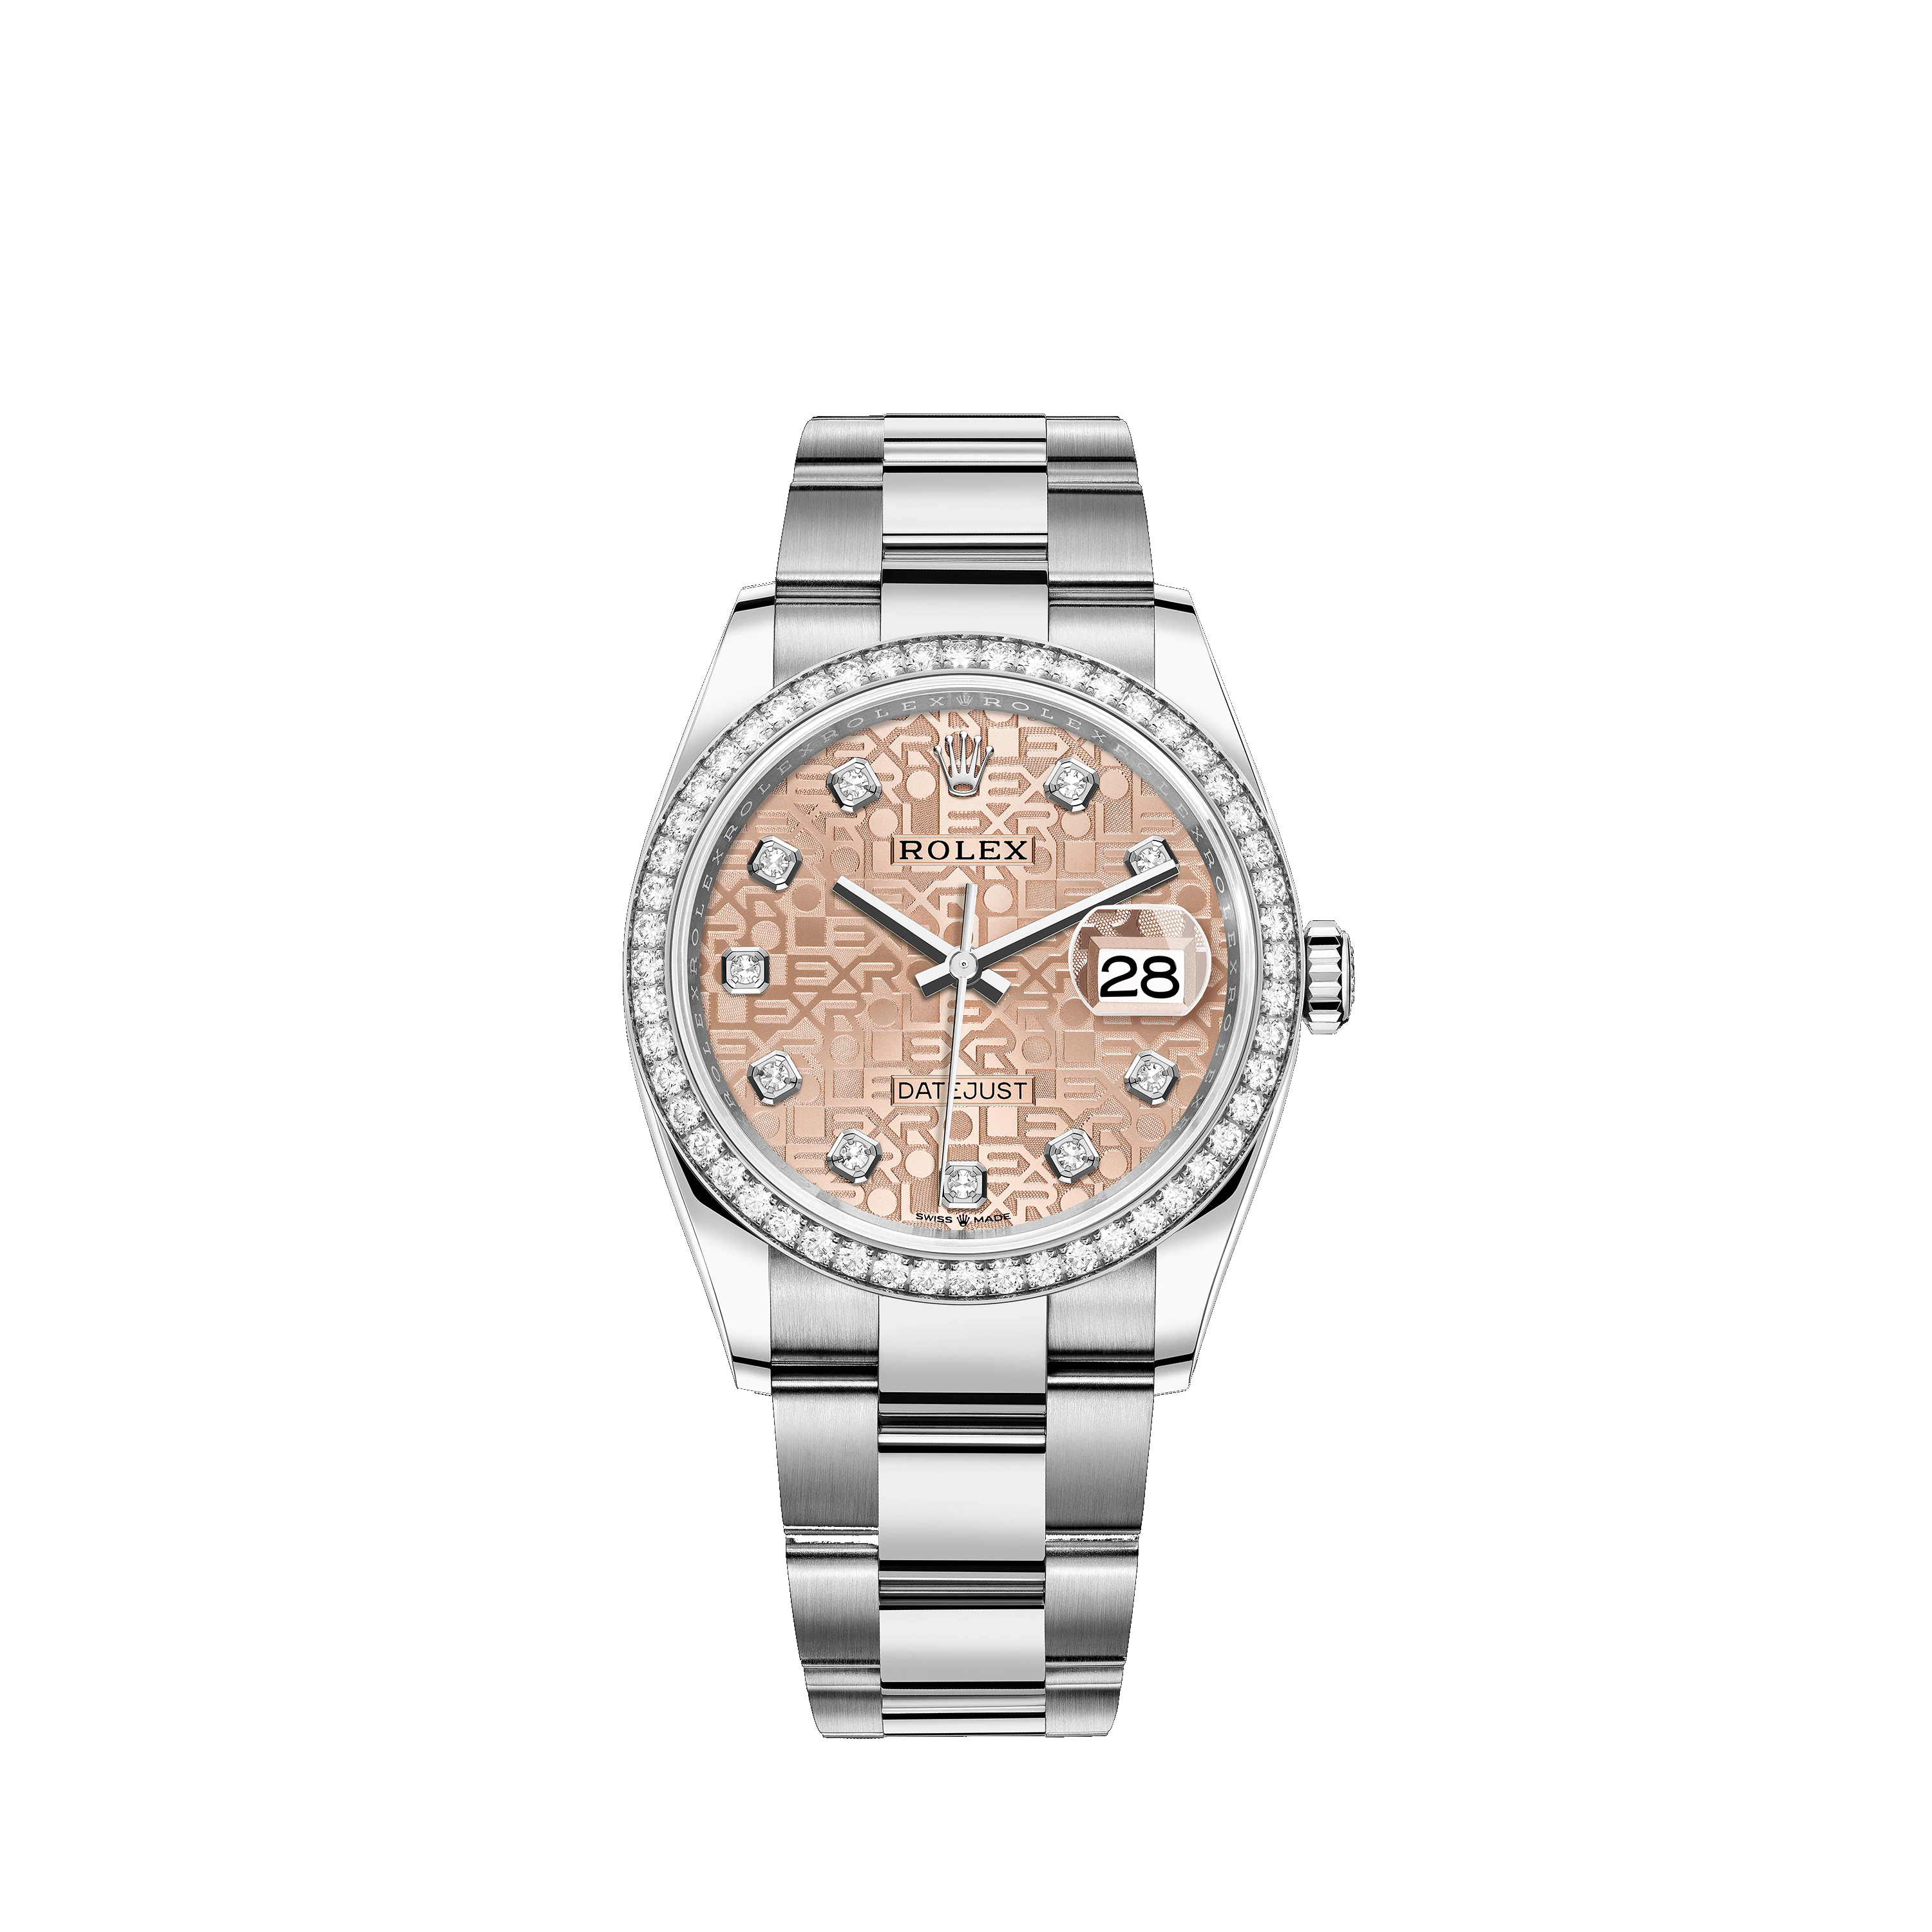 Datejust 36 126284RBR White Gold, Stainless Steel & Diamonds Watch (Pink Jubilee Design Set with Diamonds)